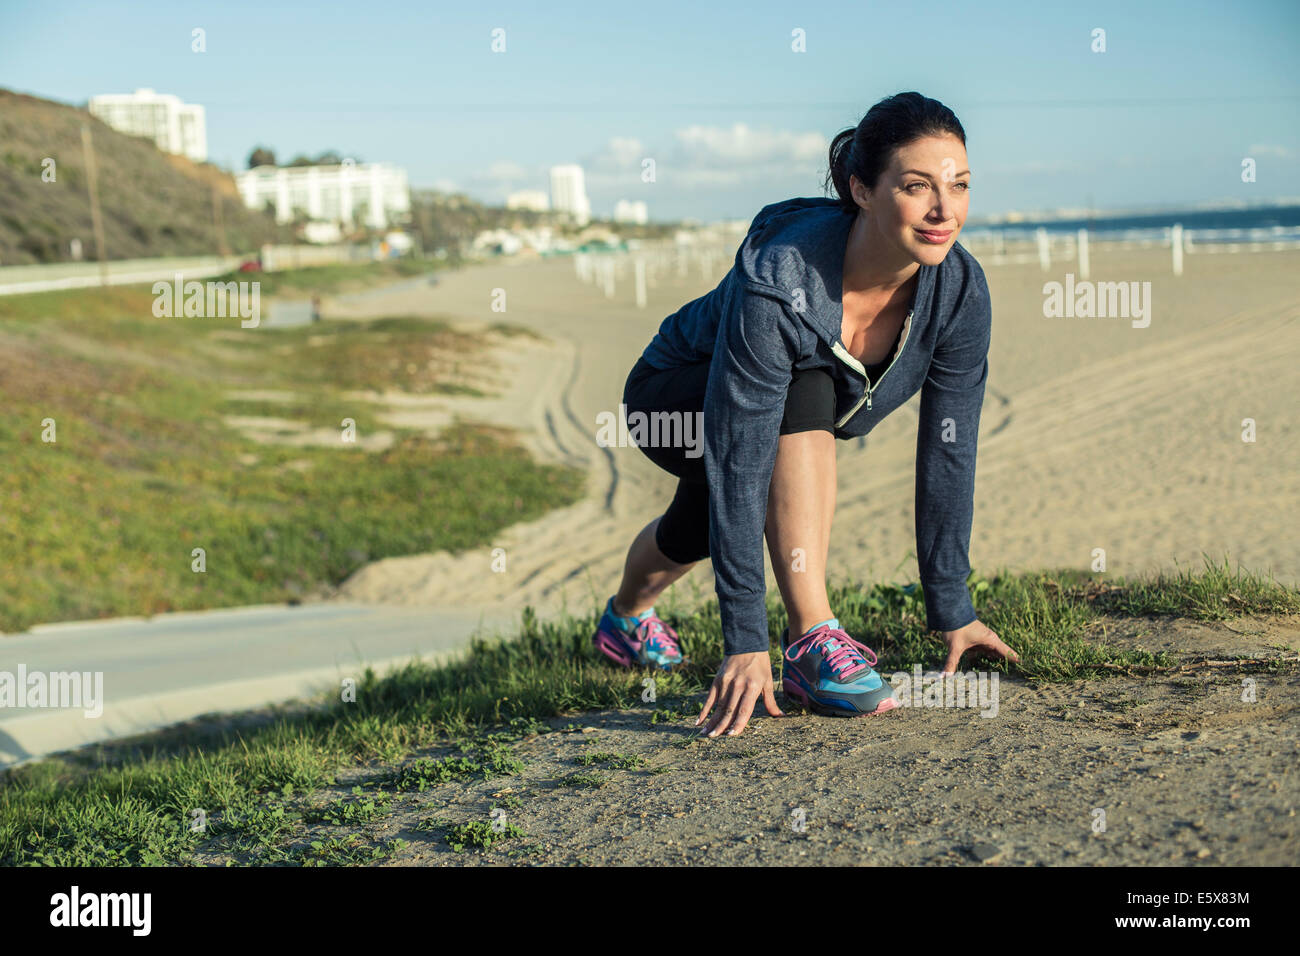 Jogger on her mark by beach Stock Photo